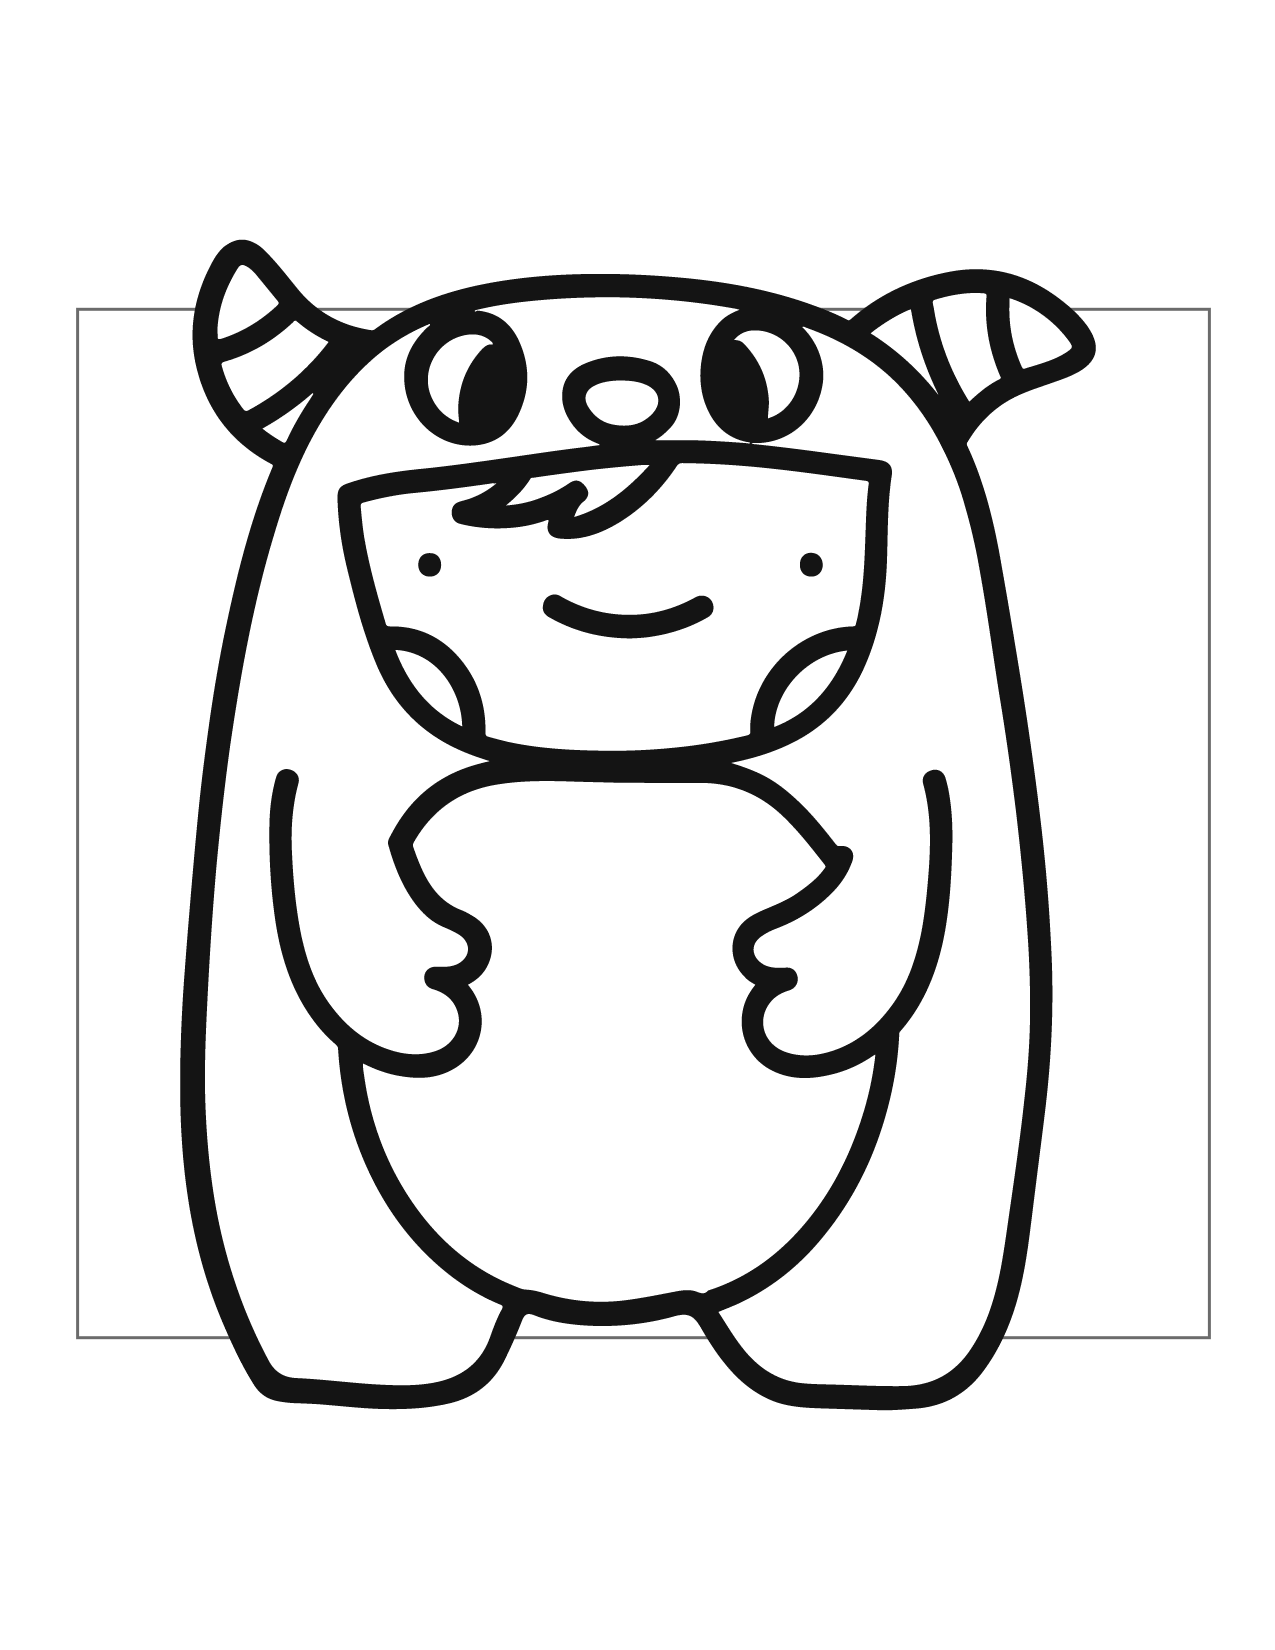 Child In Monster Suit Coloring Page